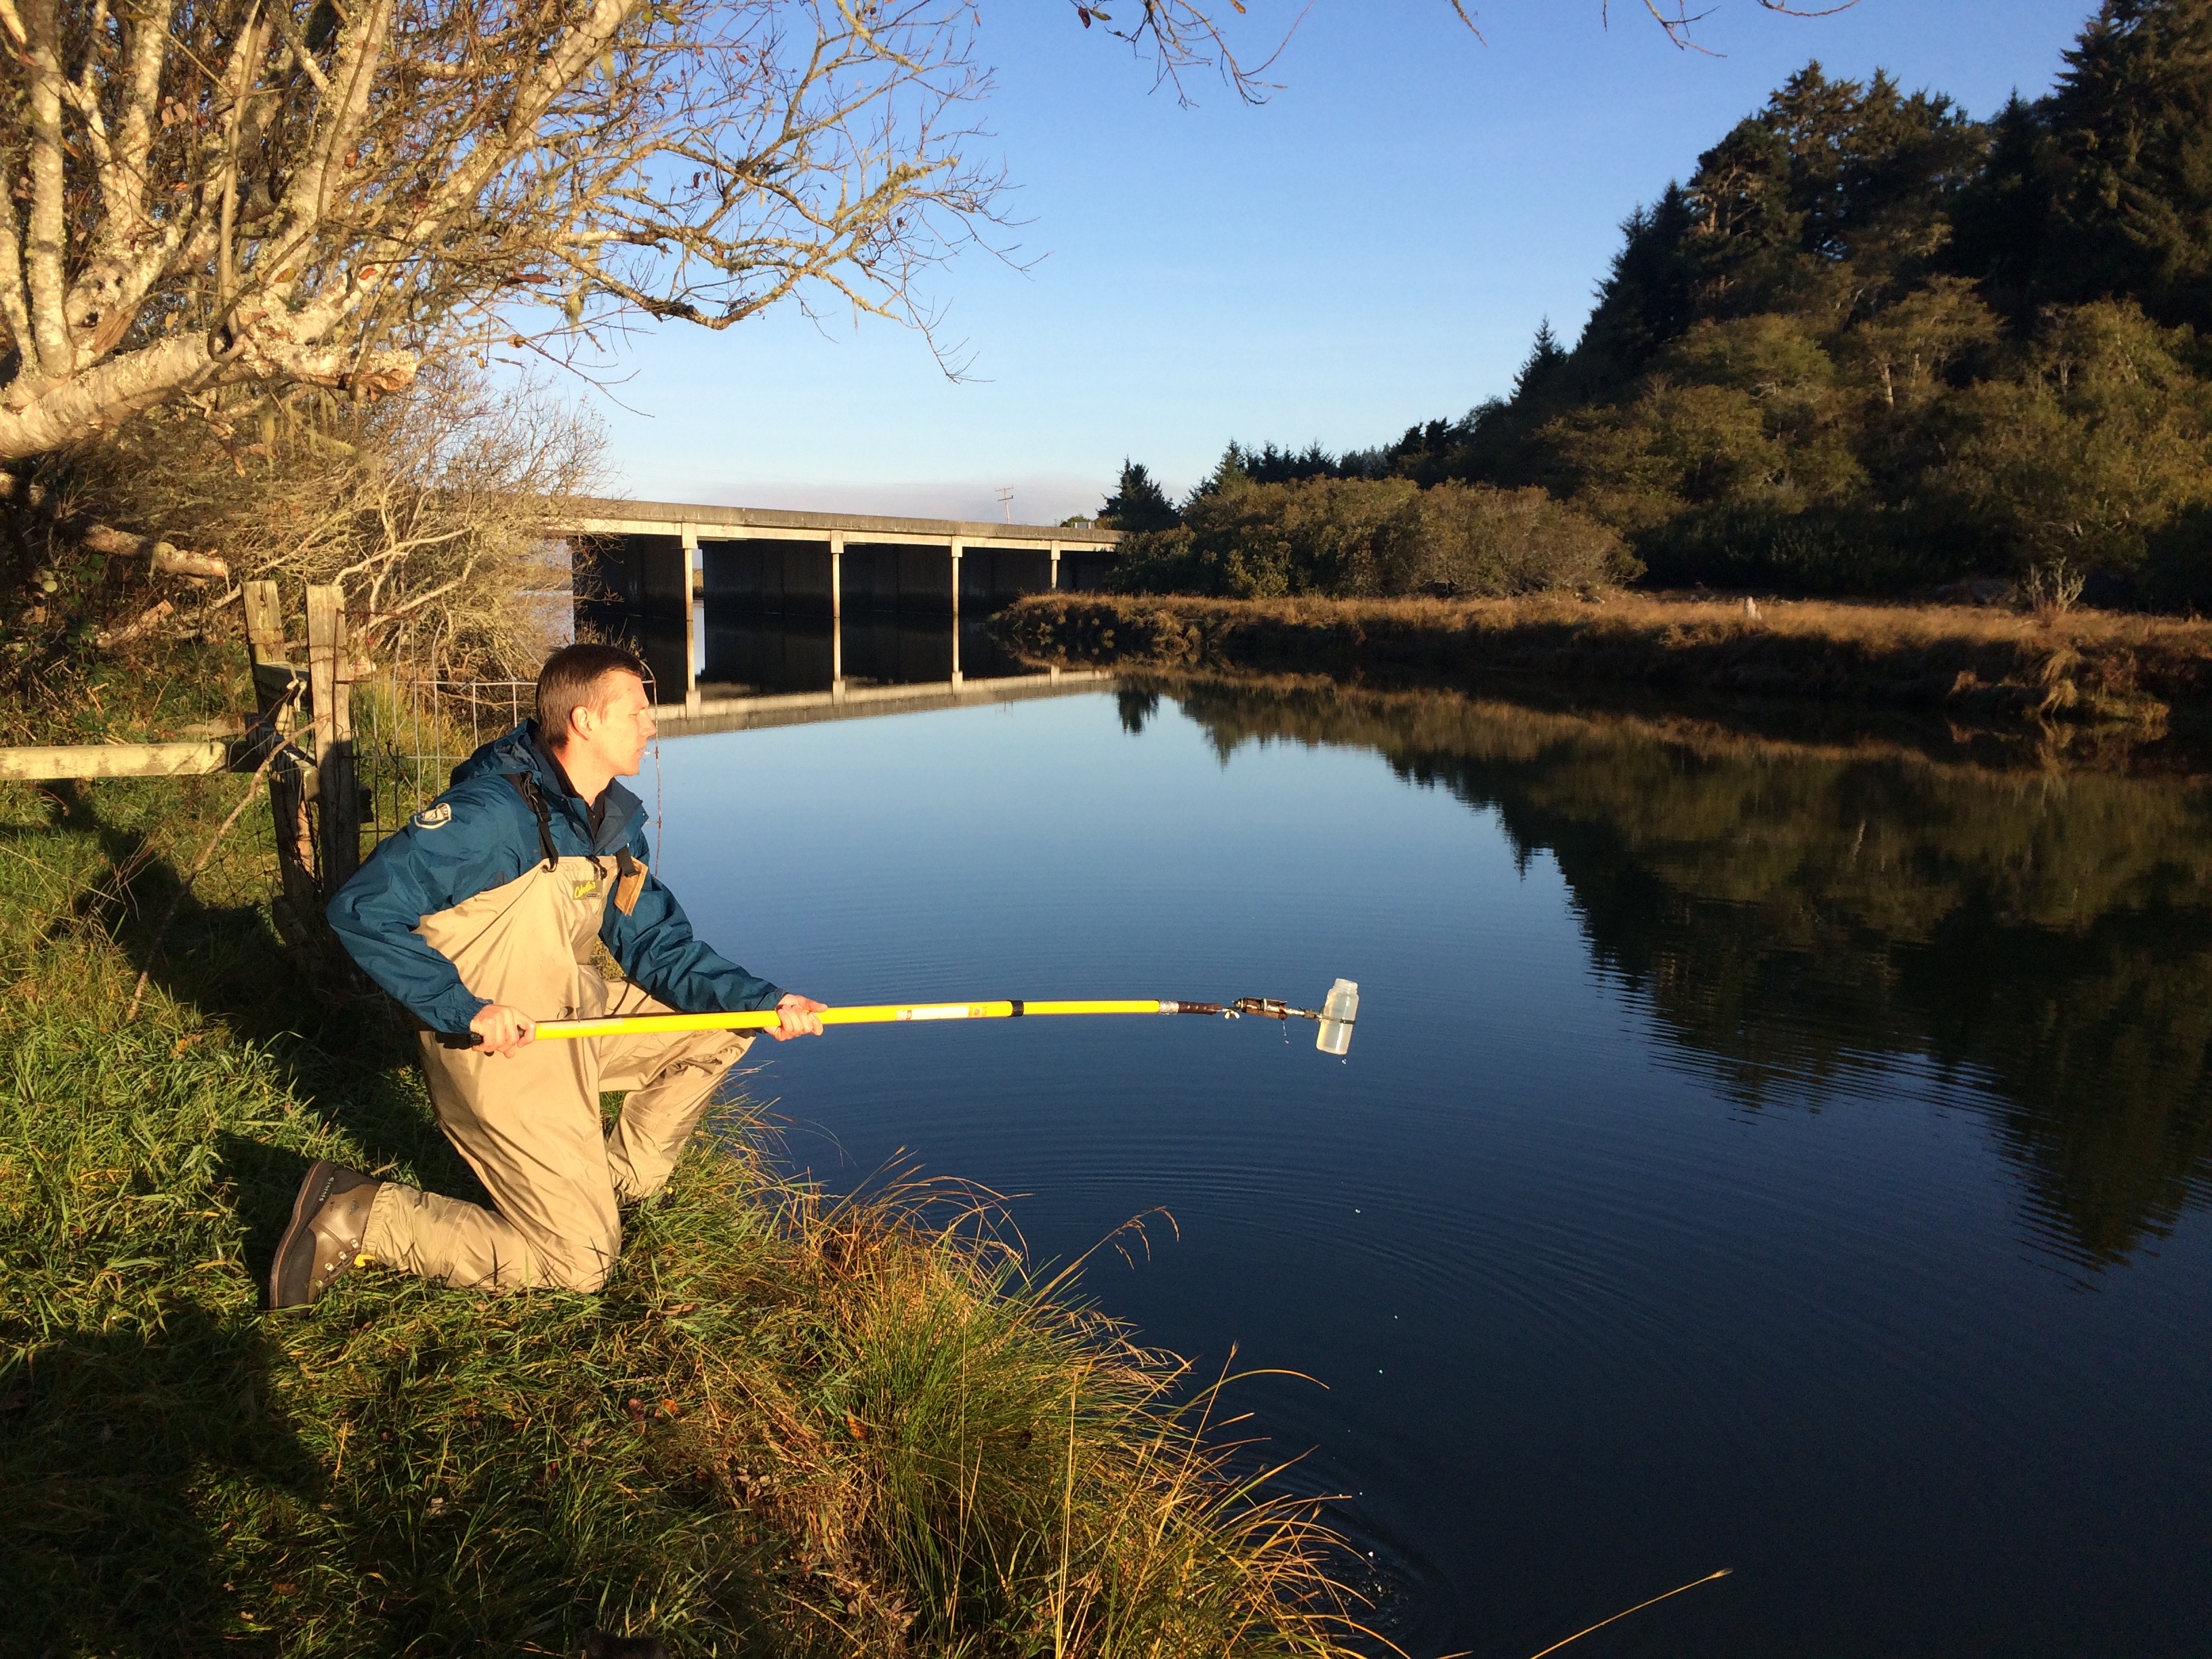 member of the Watershed Stewardship Program, collecting water samples for fecal indicator bacteria analysis from the Little River in Humboldt County